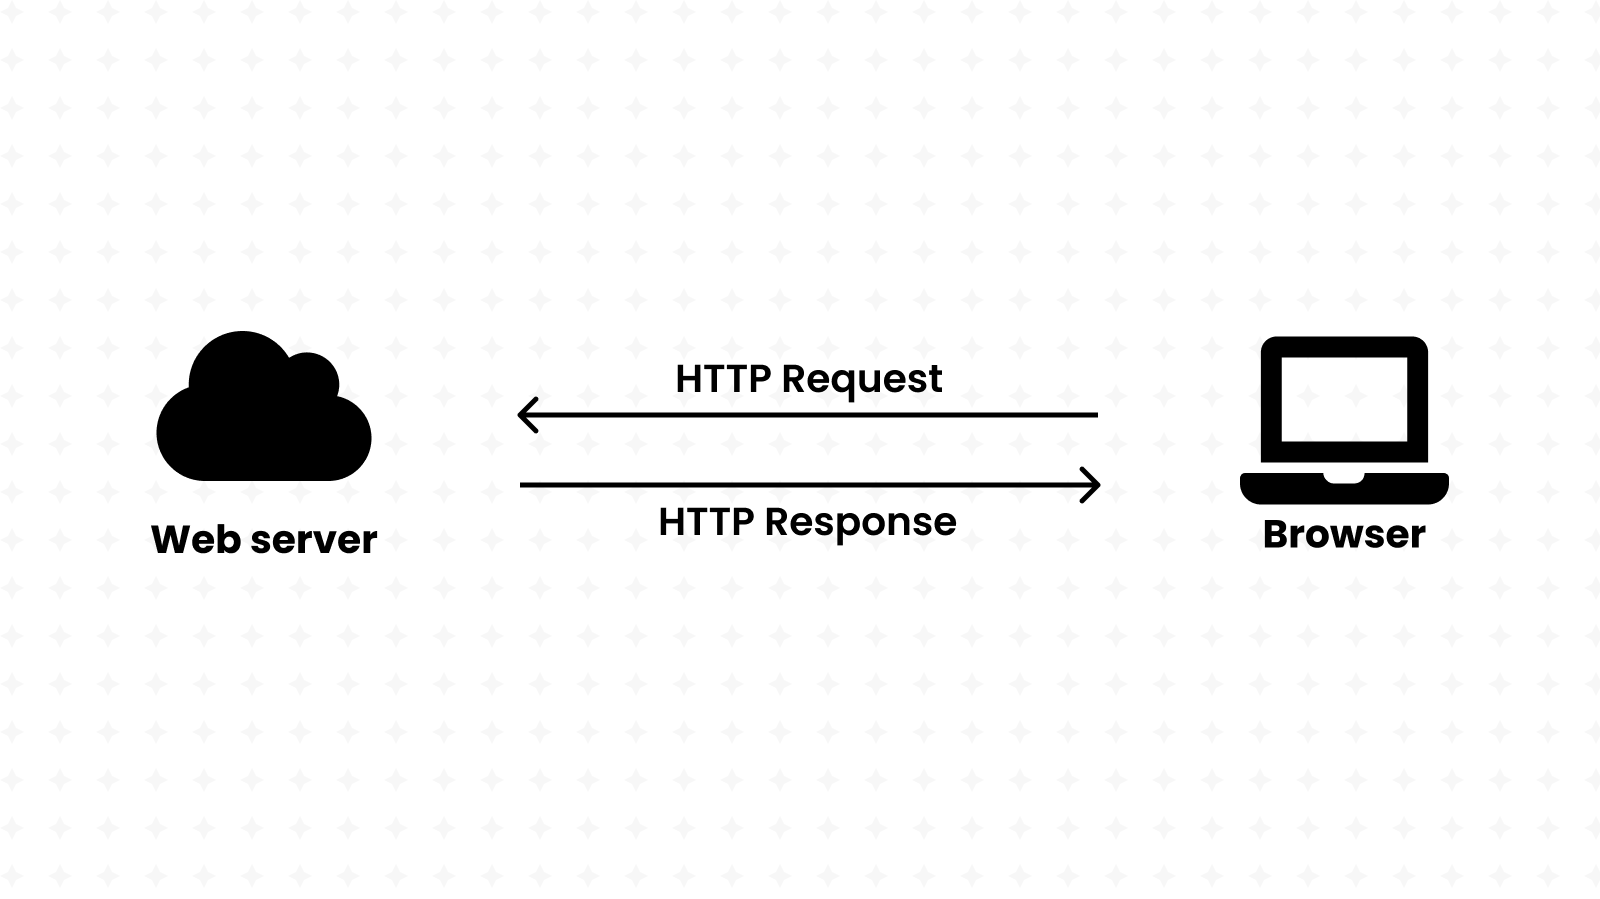 Browsers and web servers communicating back-and-forth using HTTP requests and responses.